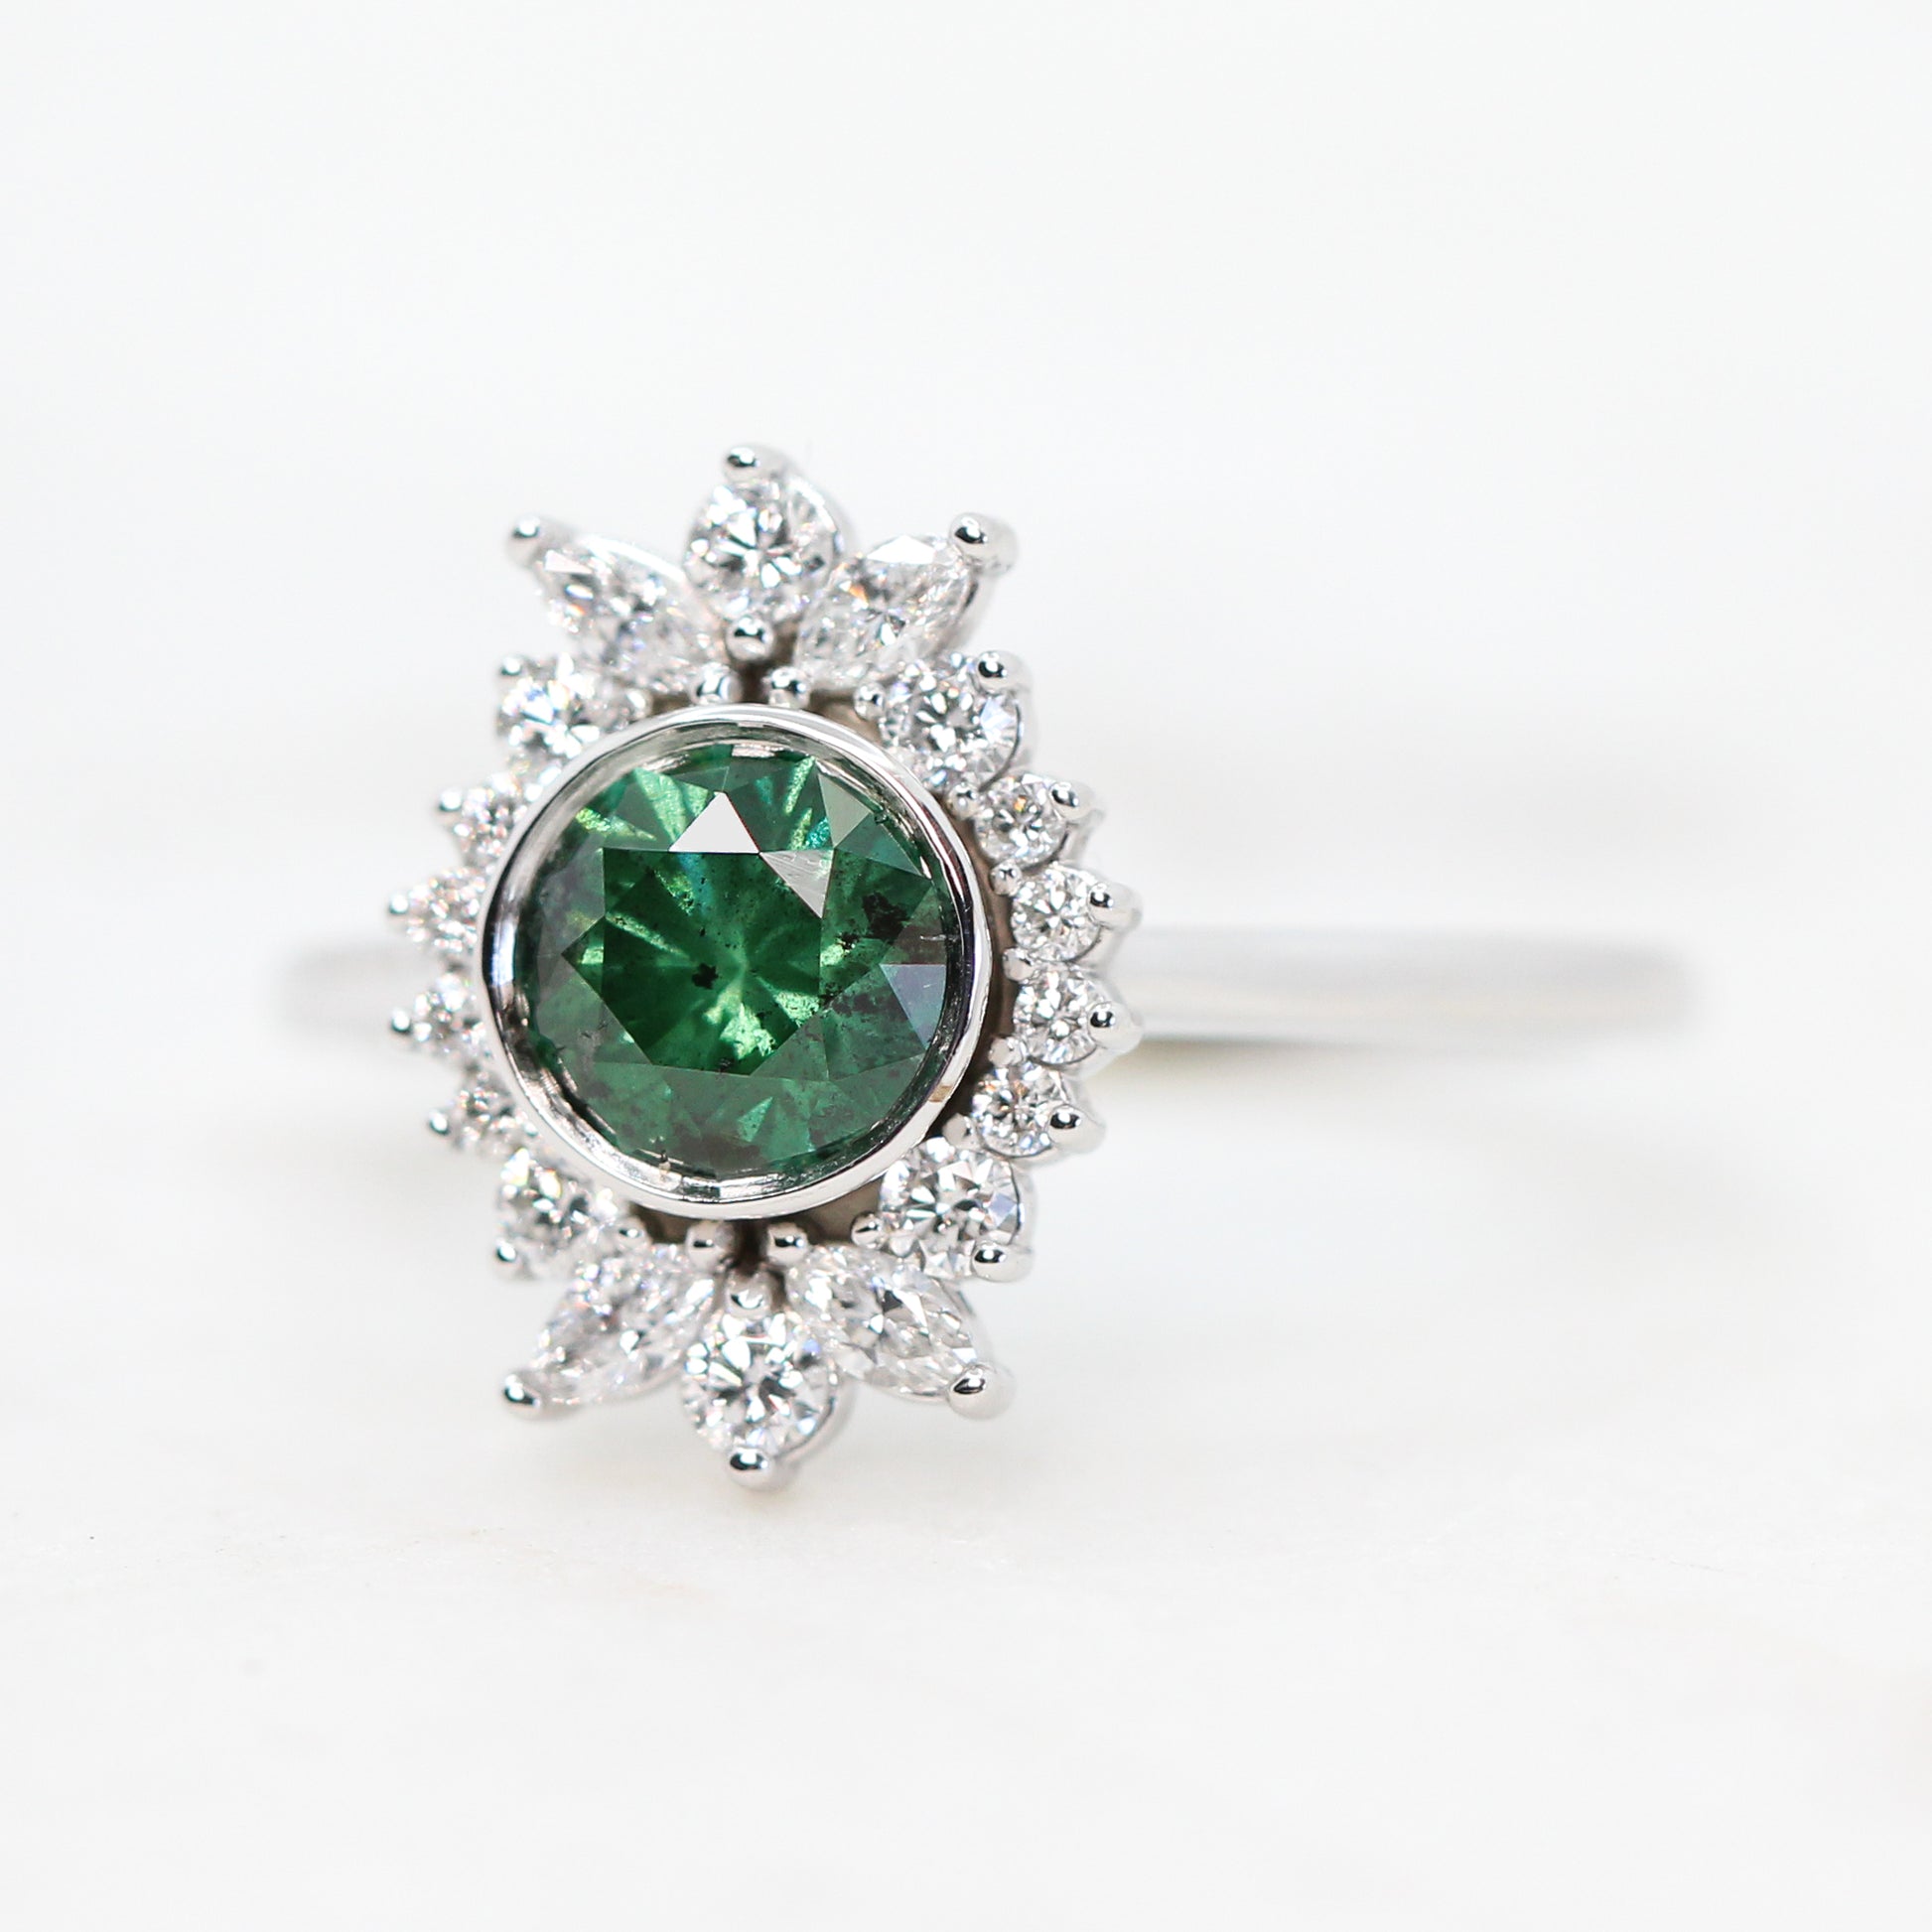 Juliette Ring with a 0.83 Carat Green Celestial Diamond and White Accent Diamonds in 14k White Gold - Ready to Size and Ship - Midwinter Co. Alternative Bridal Rings and Modern Fine Jewelry